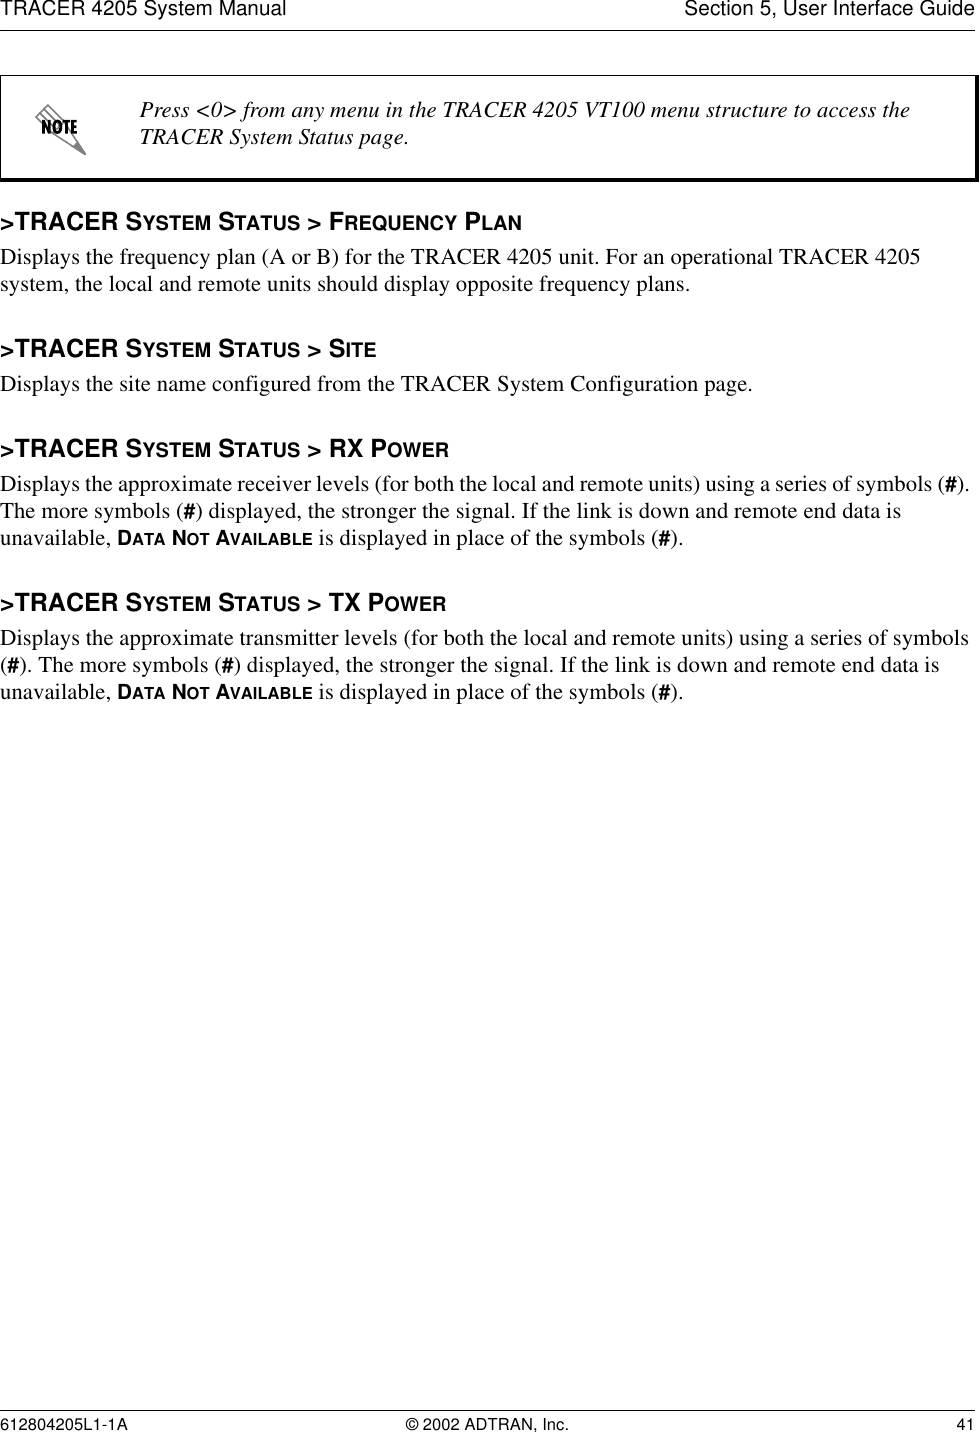 TRACER 4205 System Manual Section 5, User Interface Guide612804205L1-1A © 2002 ADTRAN, Inc. 41&gt;TRACER SYSTEM STATUS &gt; FREQUENCY PLANDisplays the frequency plan (A or B) for the TRACER 4205 unit. For an operational TRACER 4205 system, the local and remote units should display opposite frequency plans.&gt;TRACER SYSTEM STATUS &gt; SITEDisplays the site name configured from the TRACER System Configuration page.&gt;TRACER SYSTEM STATUS &gt; RX POWERDisplays the approximate receiver levels (for both the local and remote units) using a series of symbols (#). The more symbols (#) displayed, the stronger the signal. If the link is down and remote end data is unavailable, DATA NOT AVAILABLE is displayed in place of the symbols (#).&gt;TRACER SYSTEM STATUS &gt; TX POWERDisplays the approximate transmitter levels (for both the local and remote units) using a series of symbols (#). The more symbols (#) displayed, the stronger the signal. If the link is down and remote end data is unavailable, DATA NOT AVAILABLE is displayed in place of the symbols (#).Press &lt;0&gt; from any menu in the TRACER 4205 VT100 menu structure to access the TRACER System Status page.